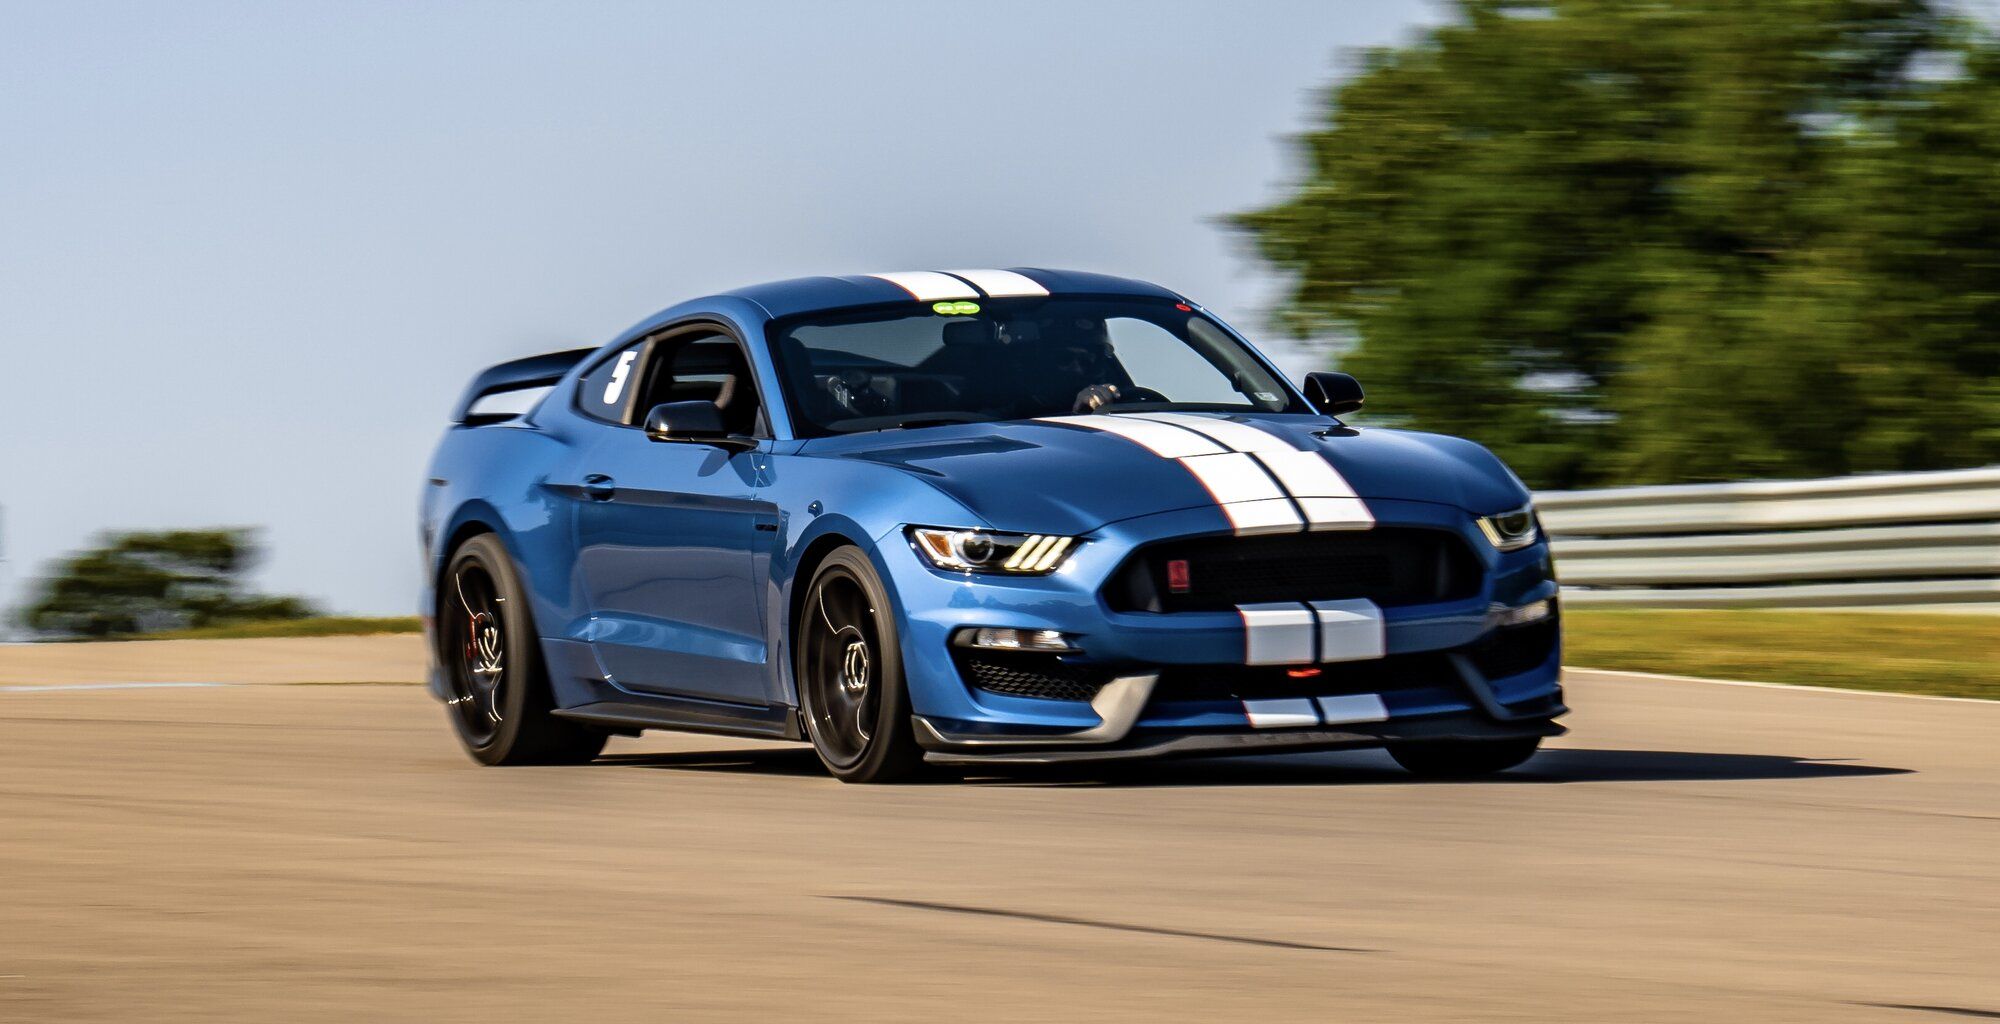 2020 Mustang
GT350  (Shelby GT350R)